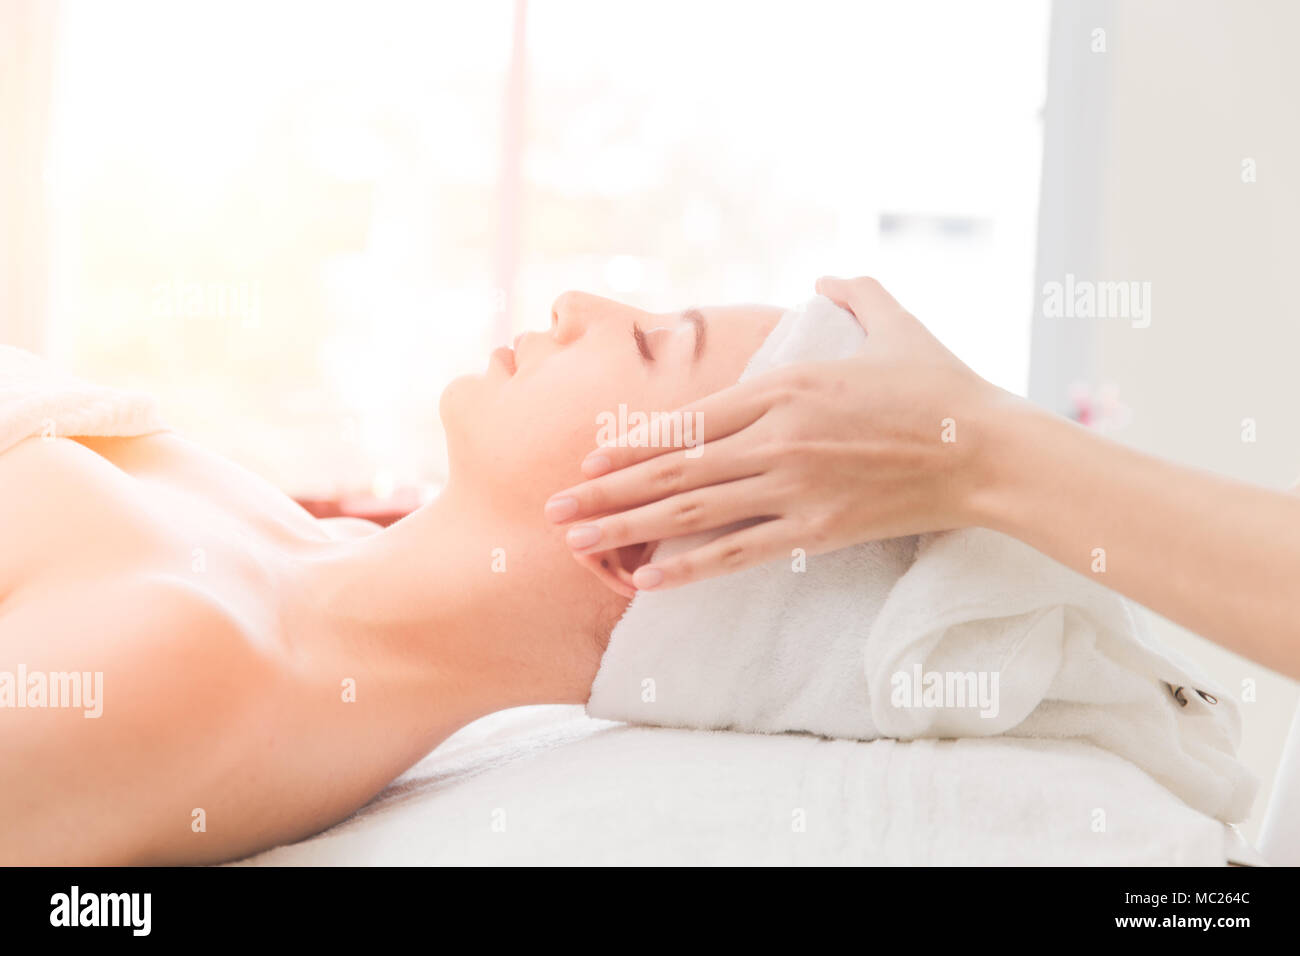 Young woman relaxing at health spa massage Stock Photo